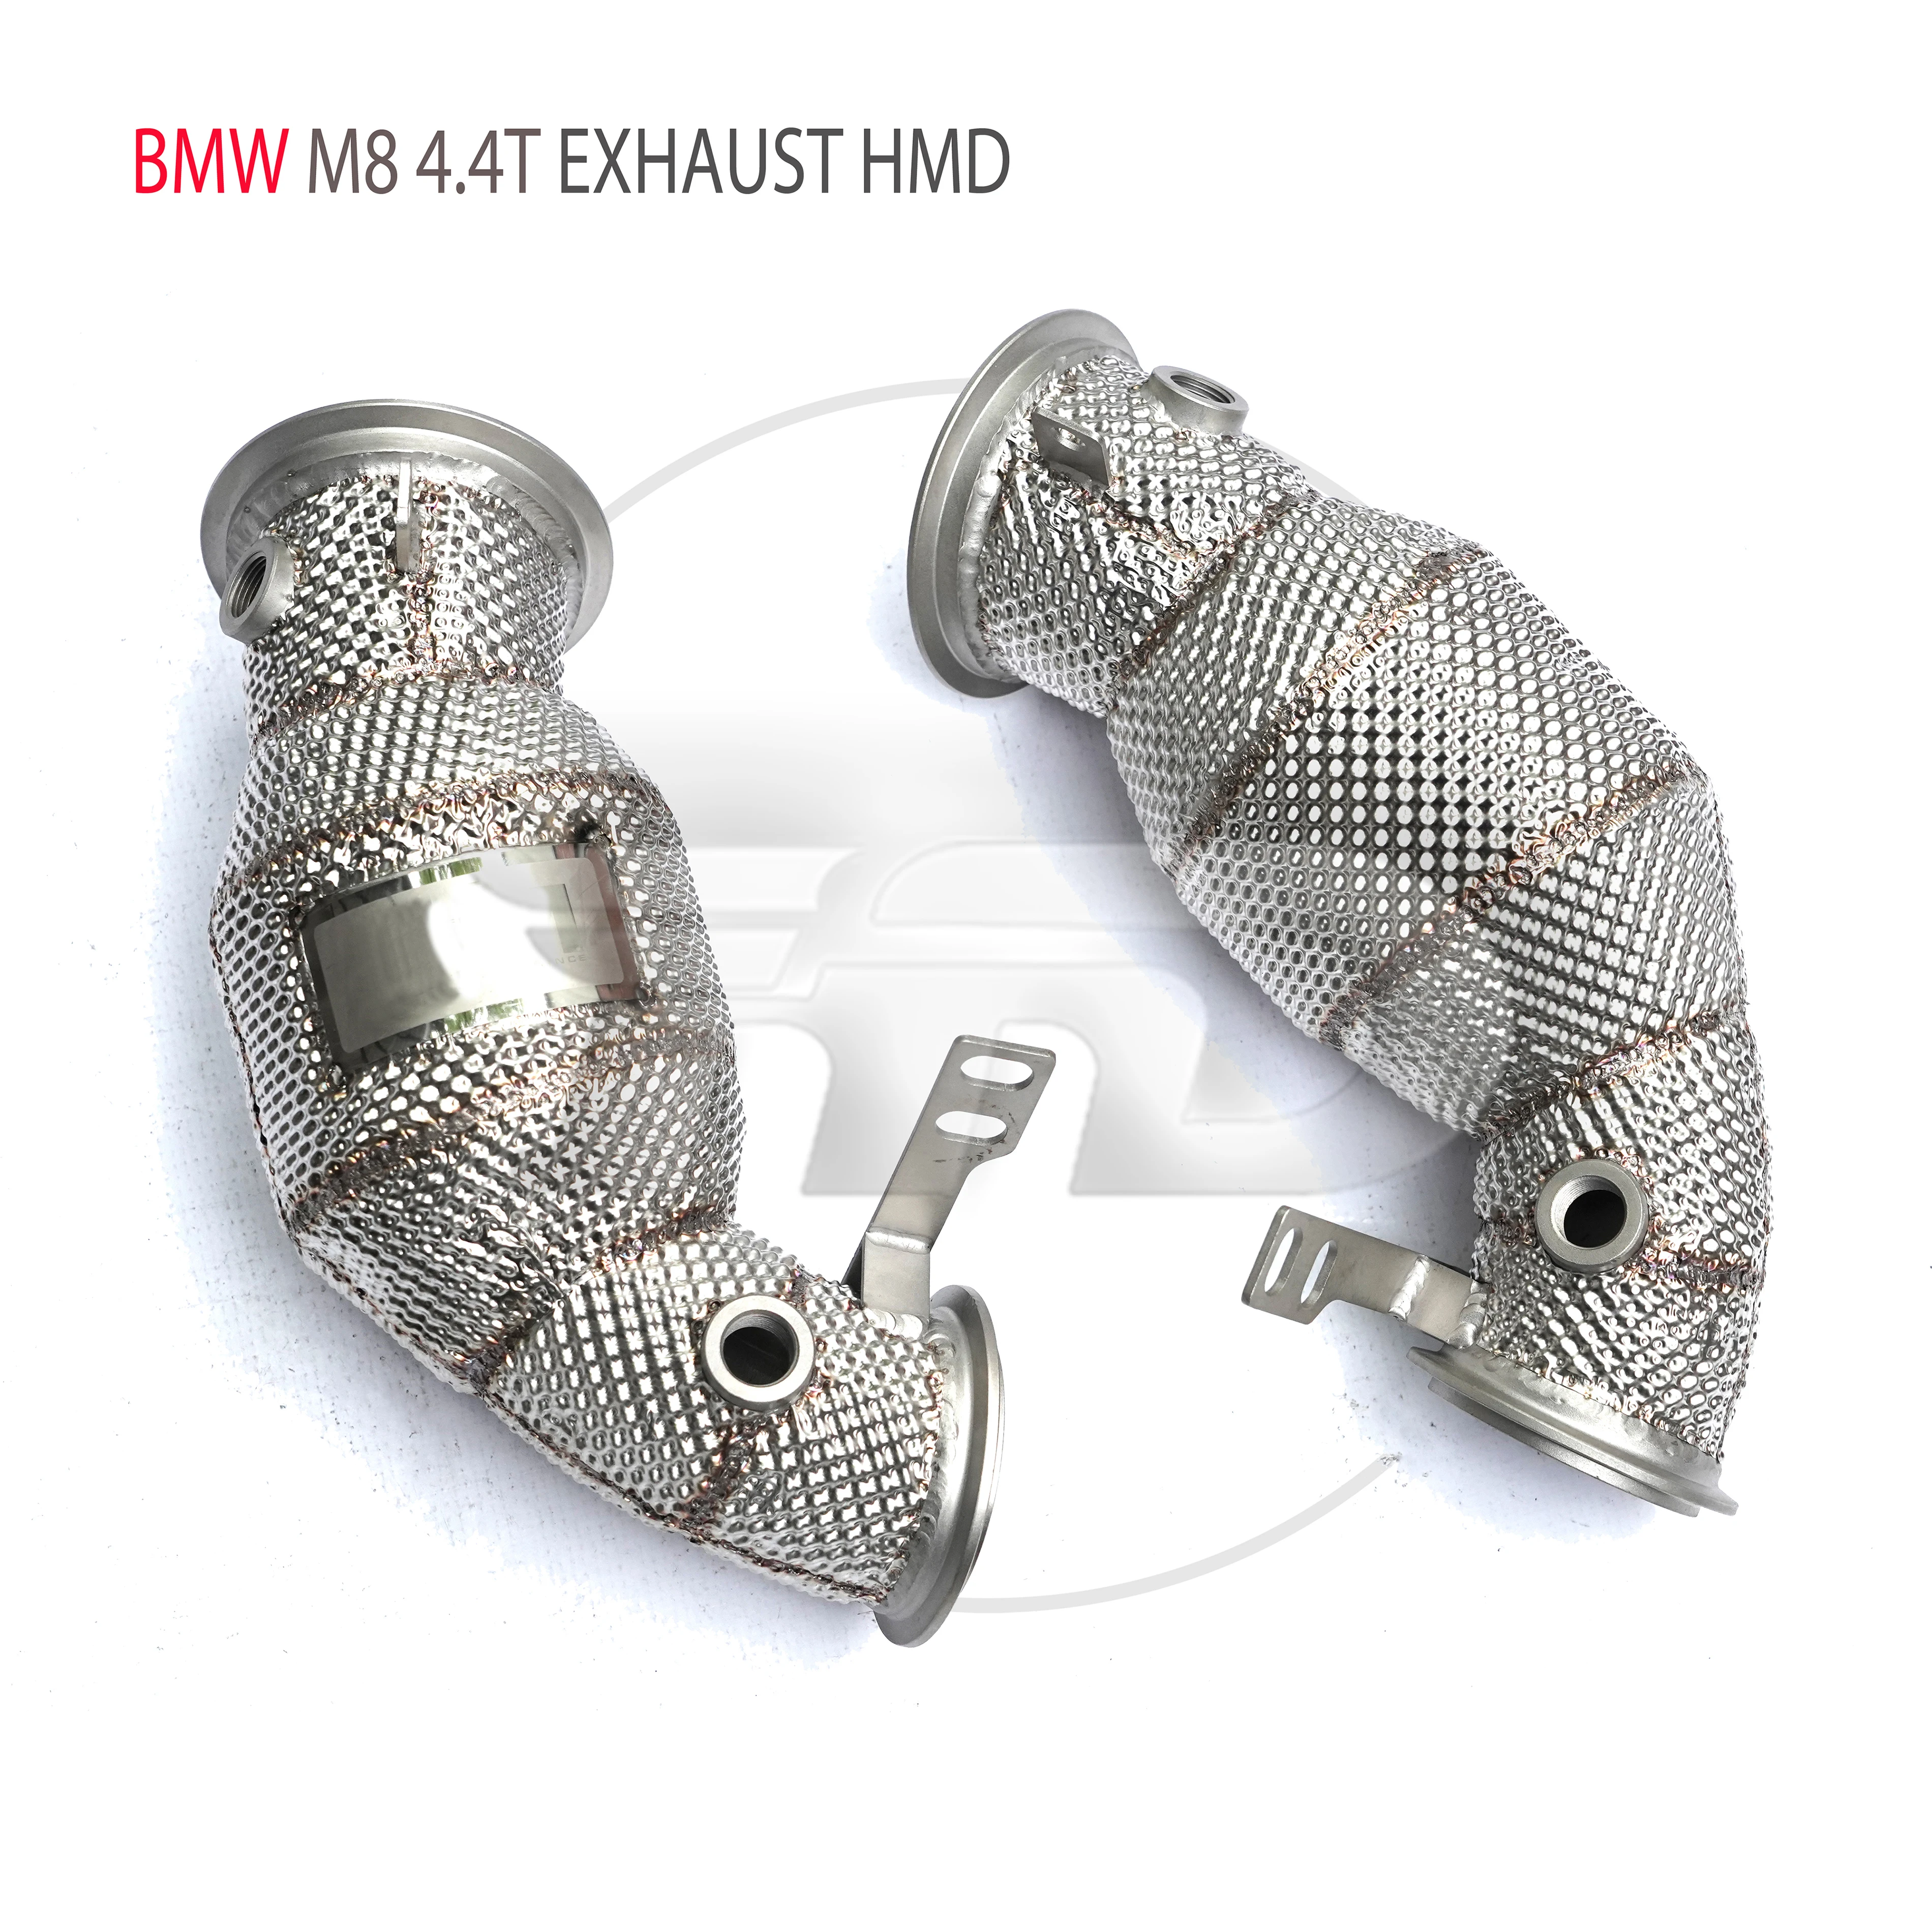 

HMD Car Accessories Exhaust System High Flow Performance Downpipe for BMW M8 4.4T With Catalytic ConverterAuto Parts